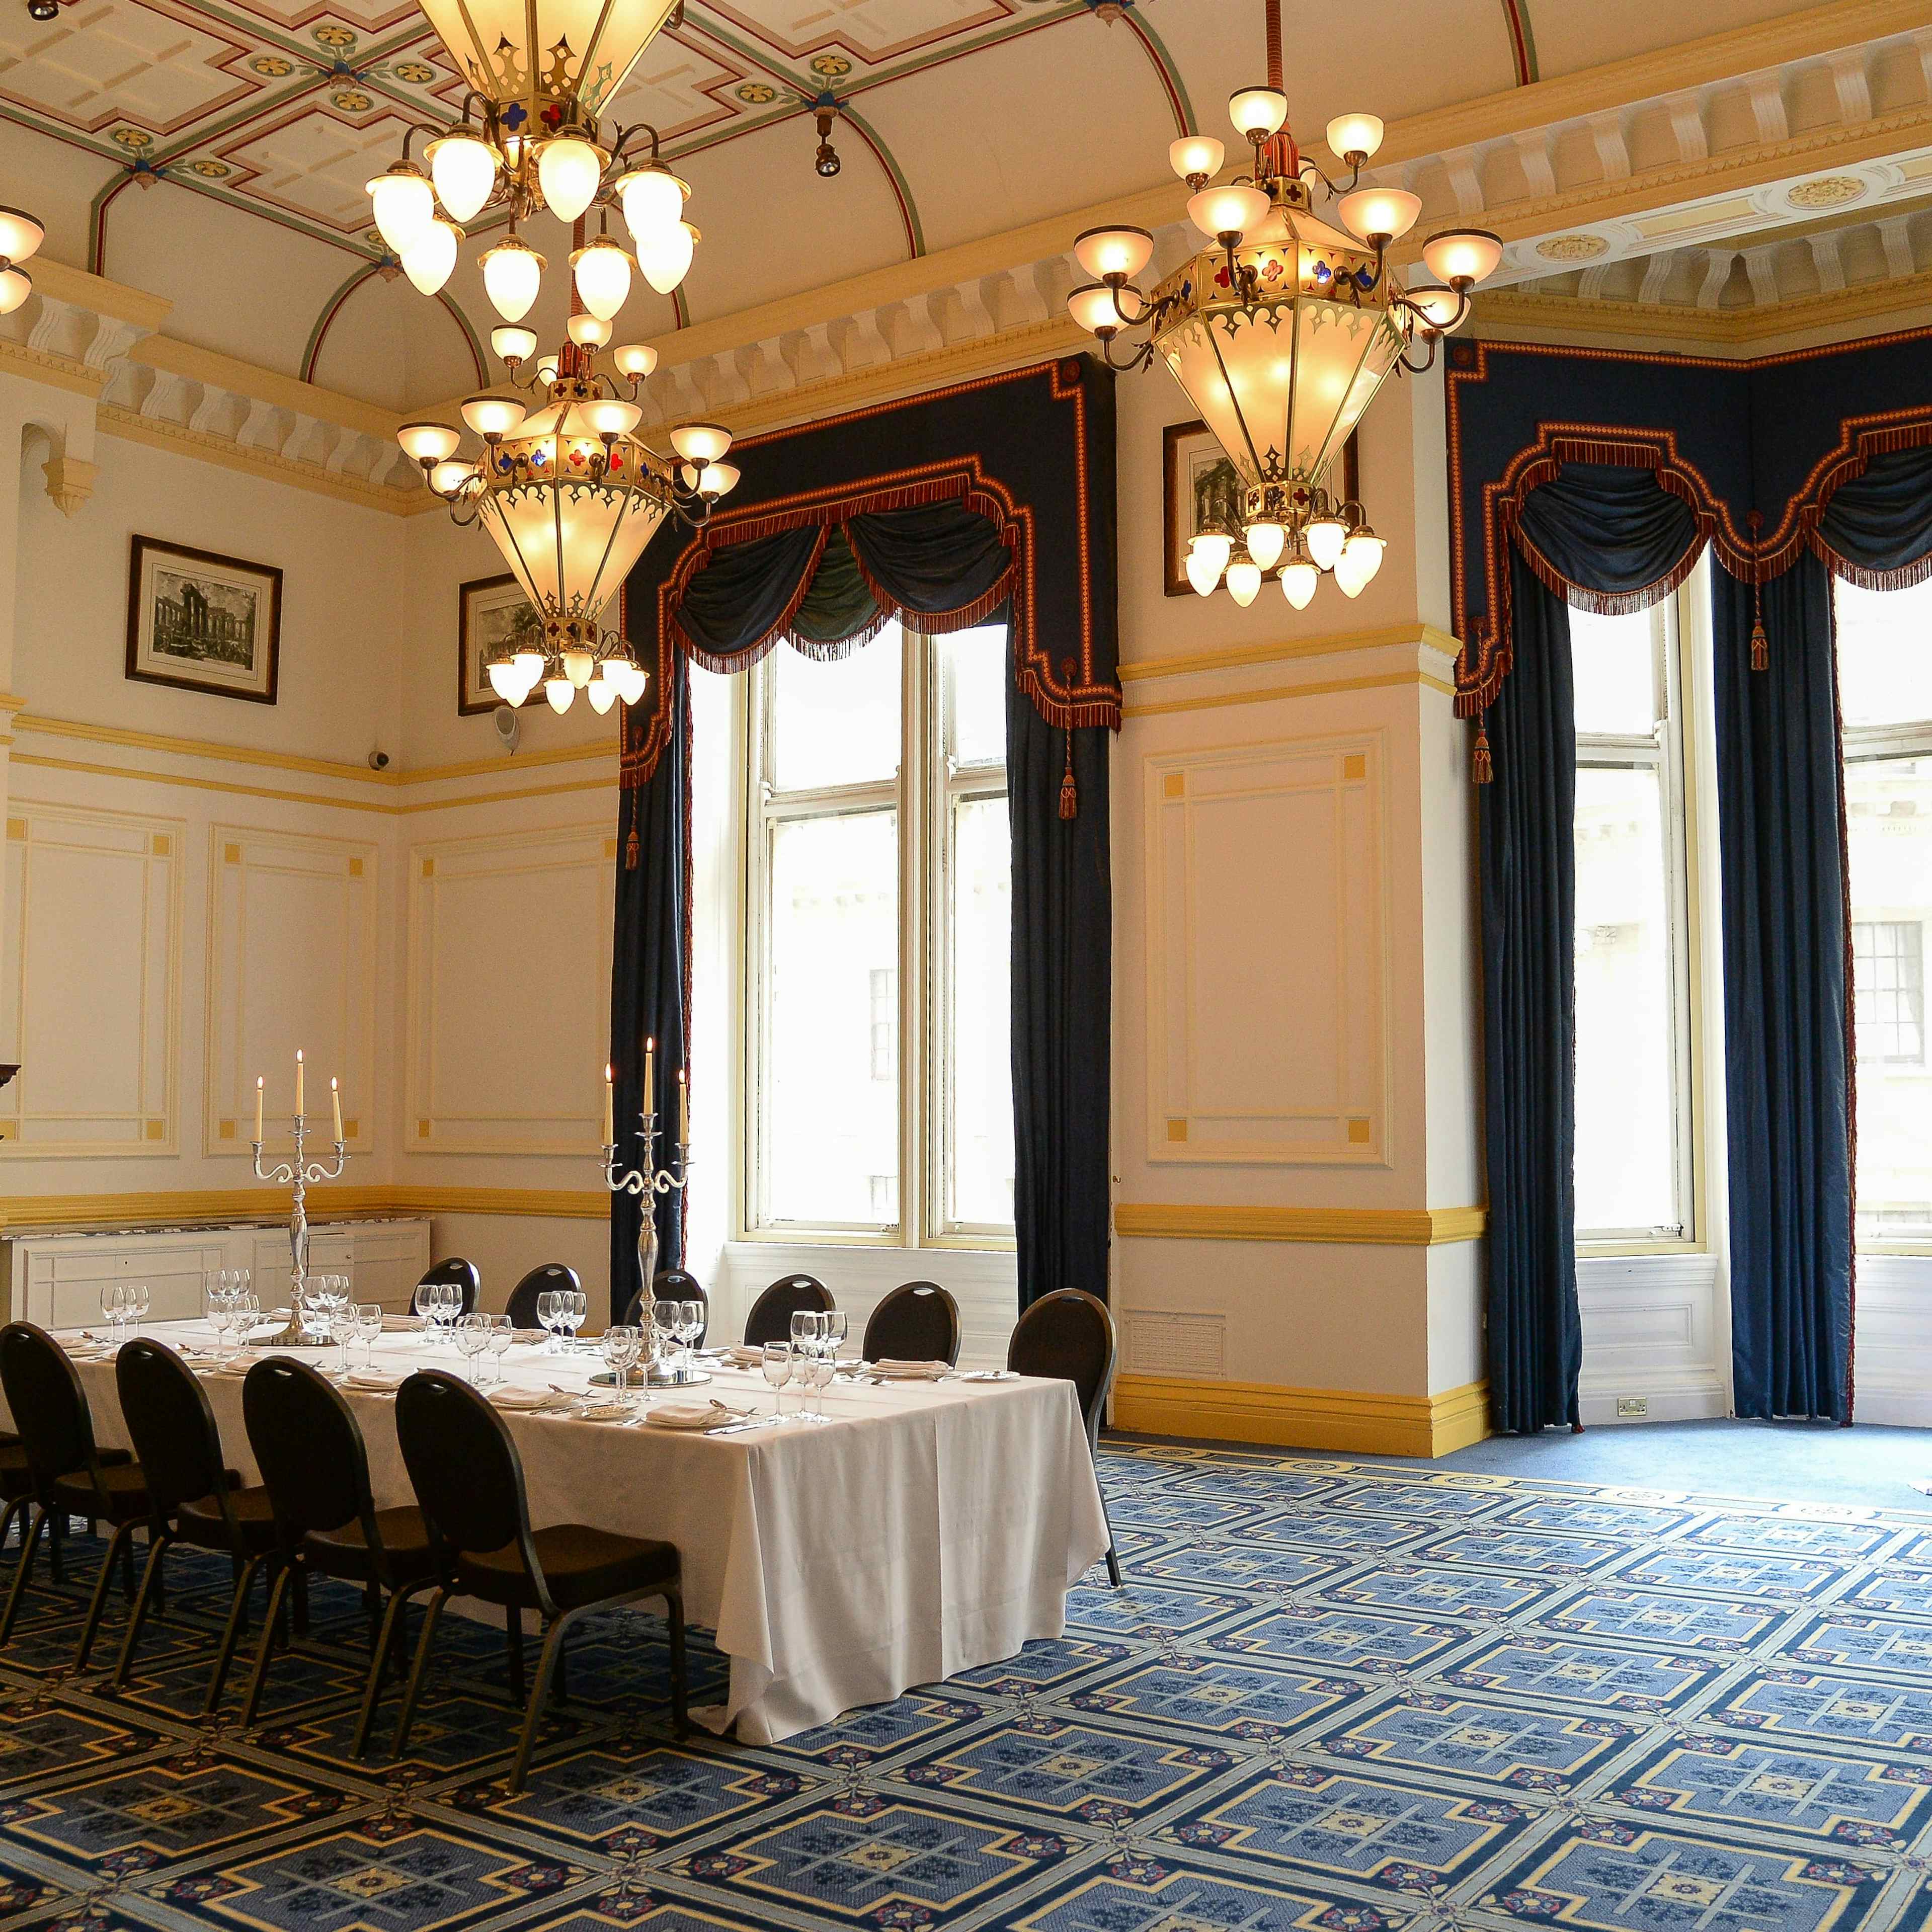 The Royal Horseguards Hotel and One Whitehall Place - The Meston Suite image 3